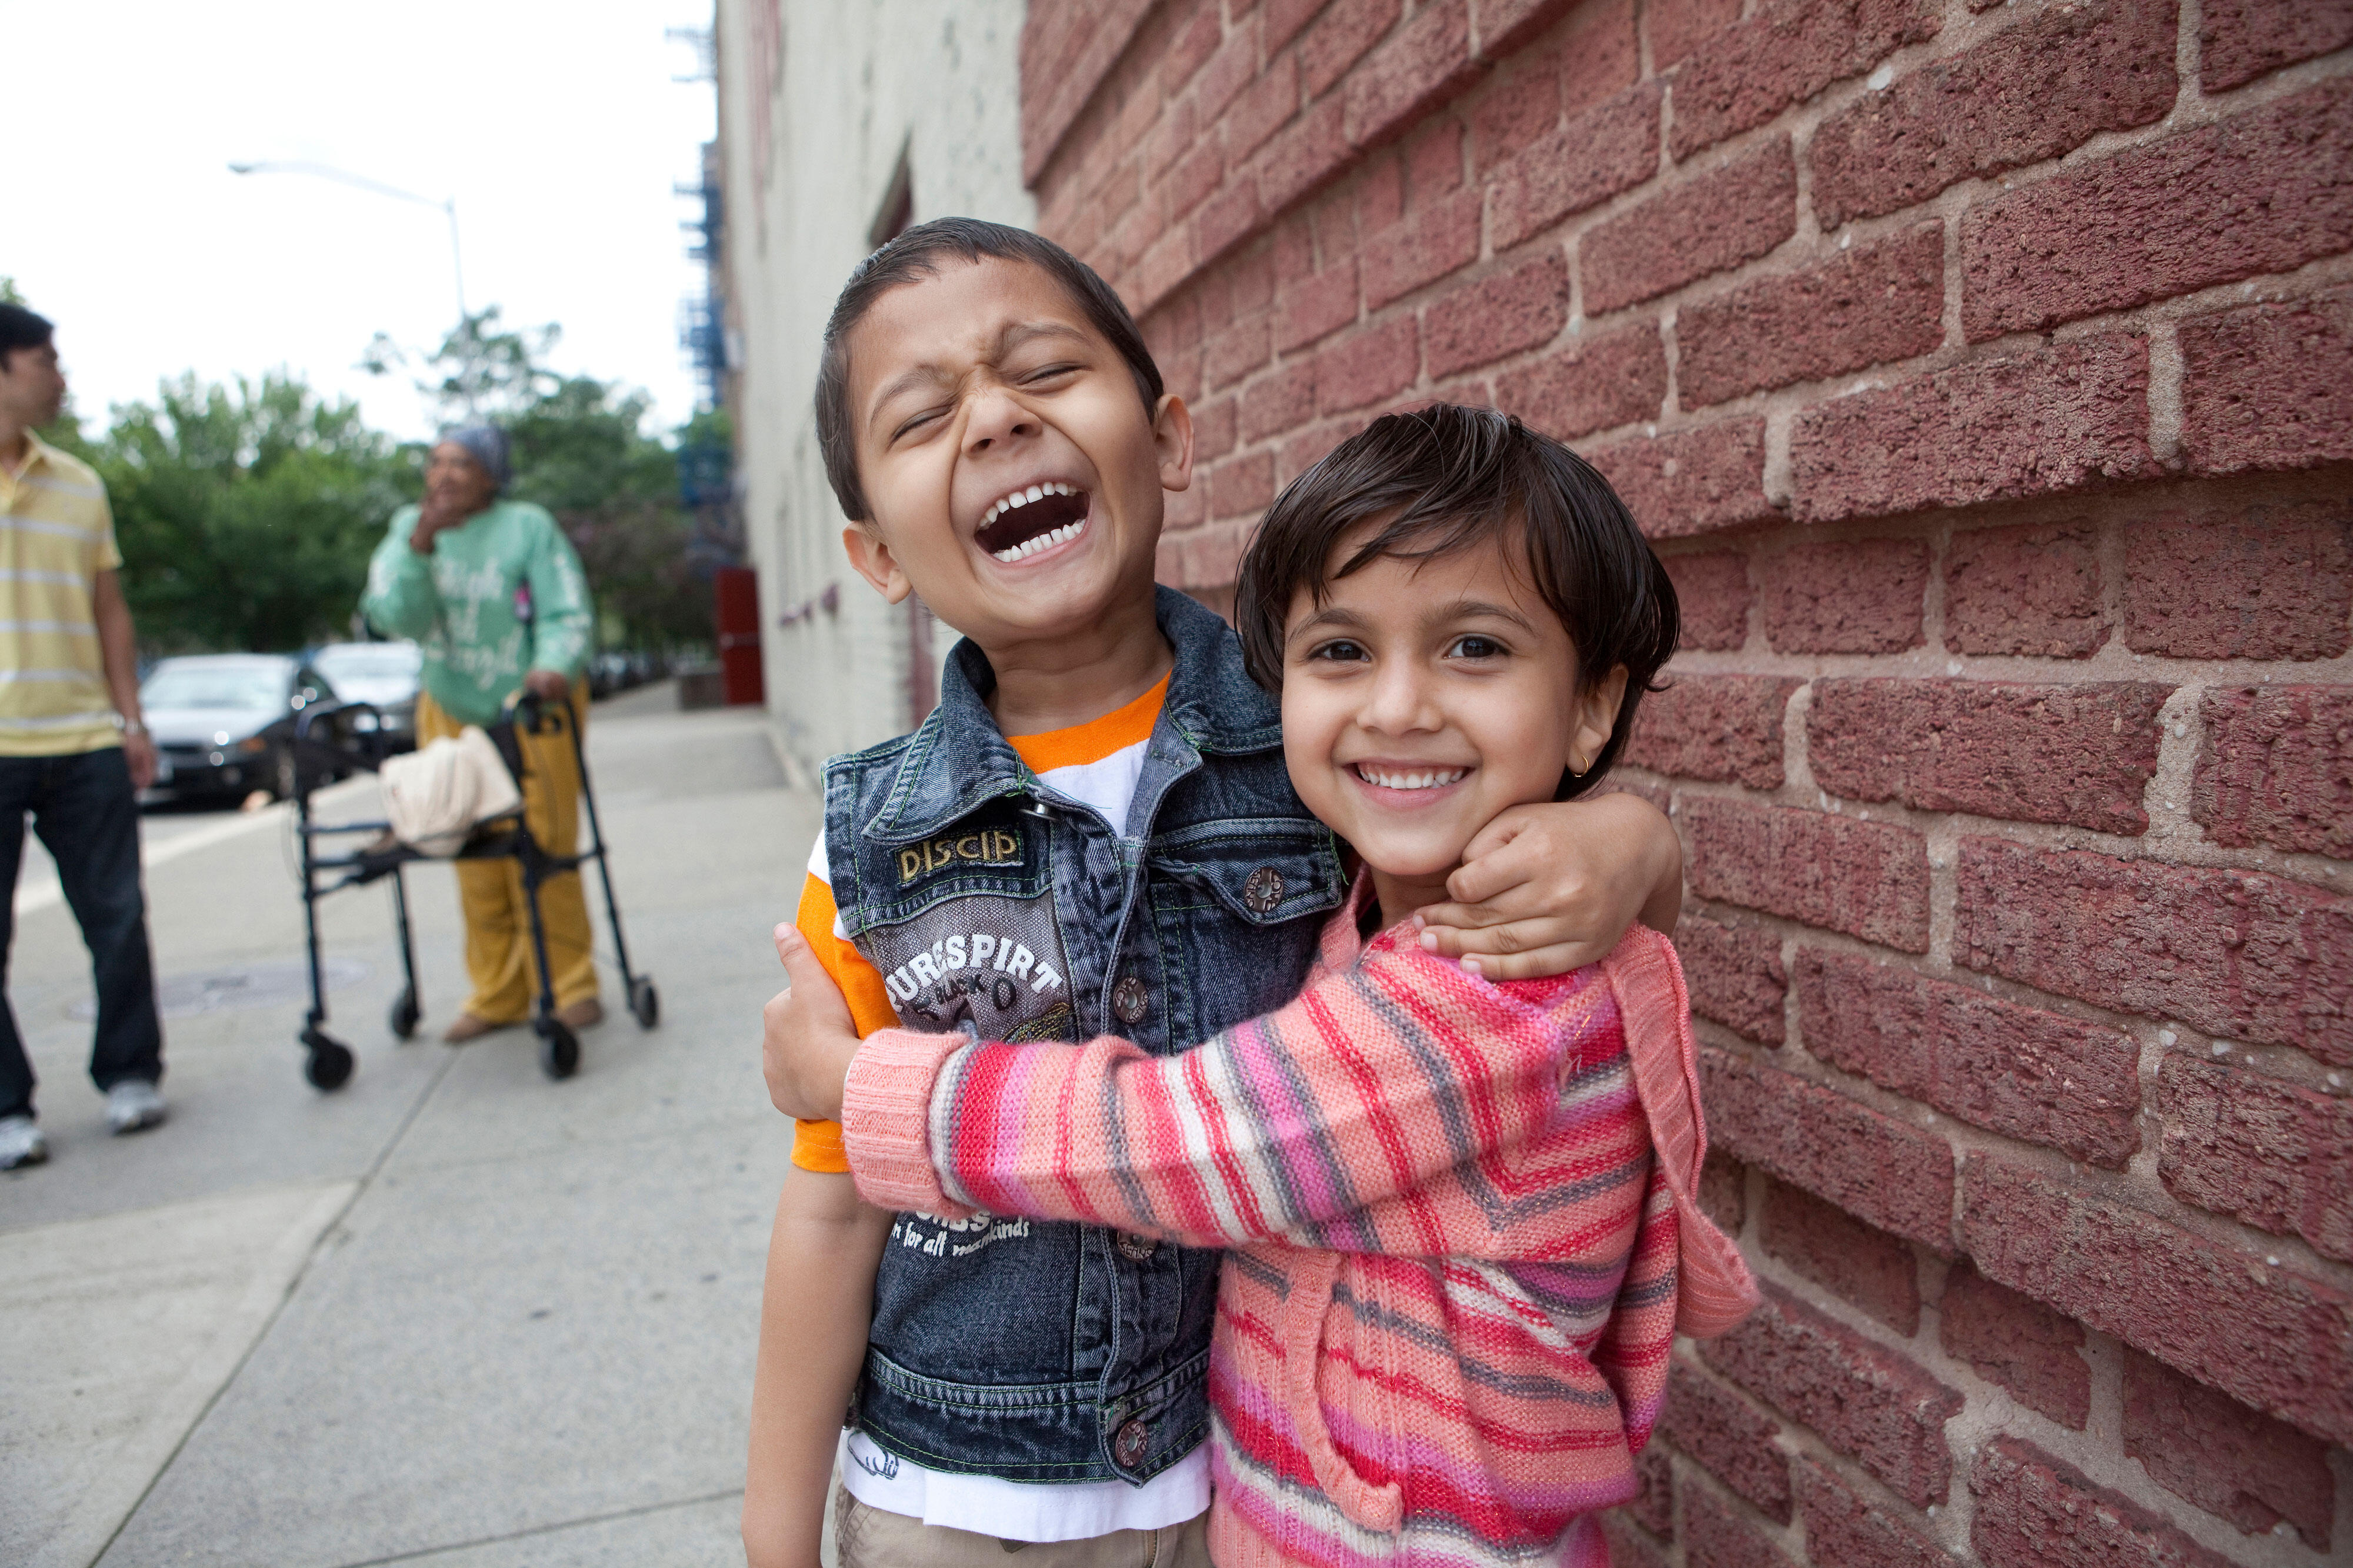 A young boy and girl stand outside in front of a brick wall, laughing and embracing.